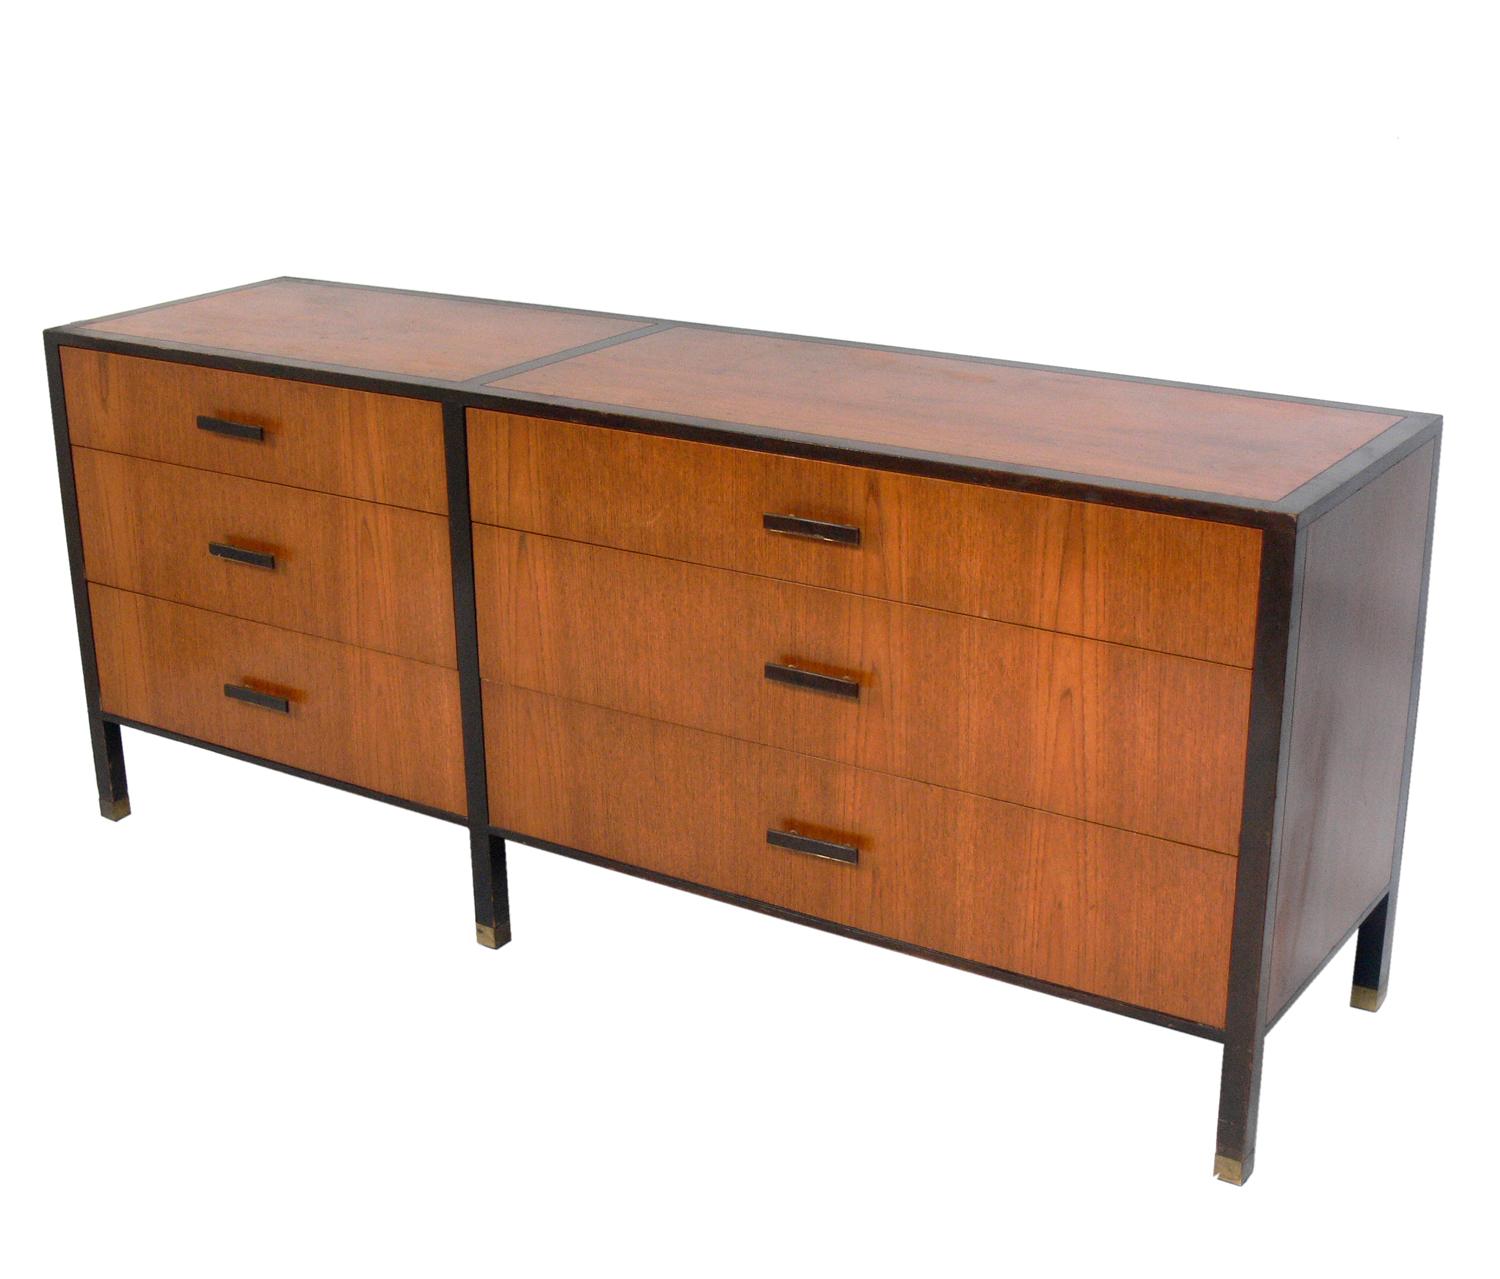 Clean lined rosewood and mahogany chest, designed by Harvey Probber, American, circa 1960s. It offers a voluminous amount of storage with six deep drawers. It is a versatile size and can be used in a bedroom as a chest or dresser, or in a living